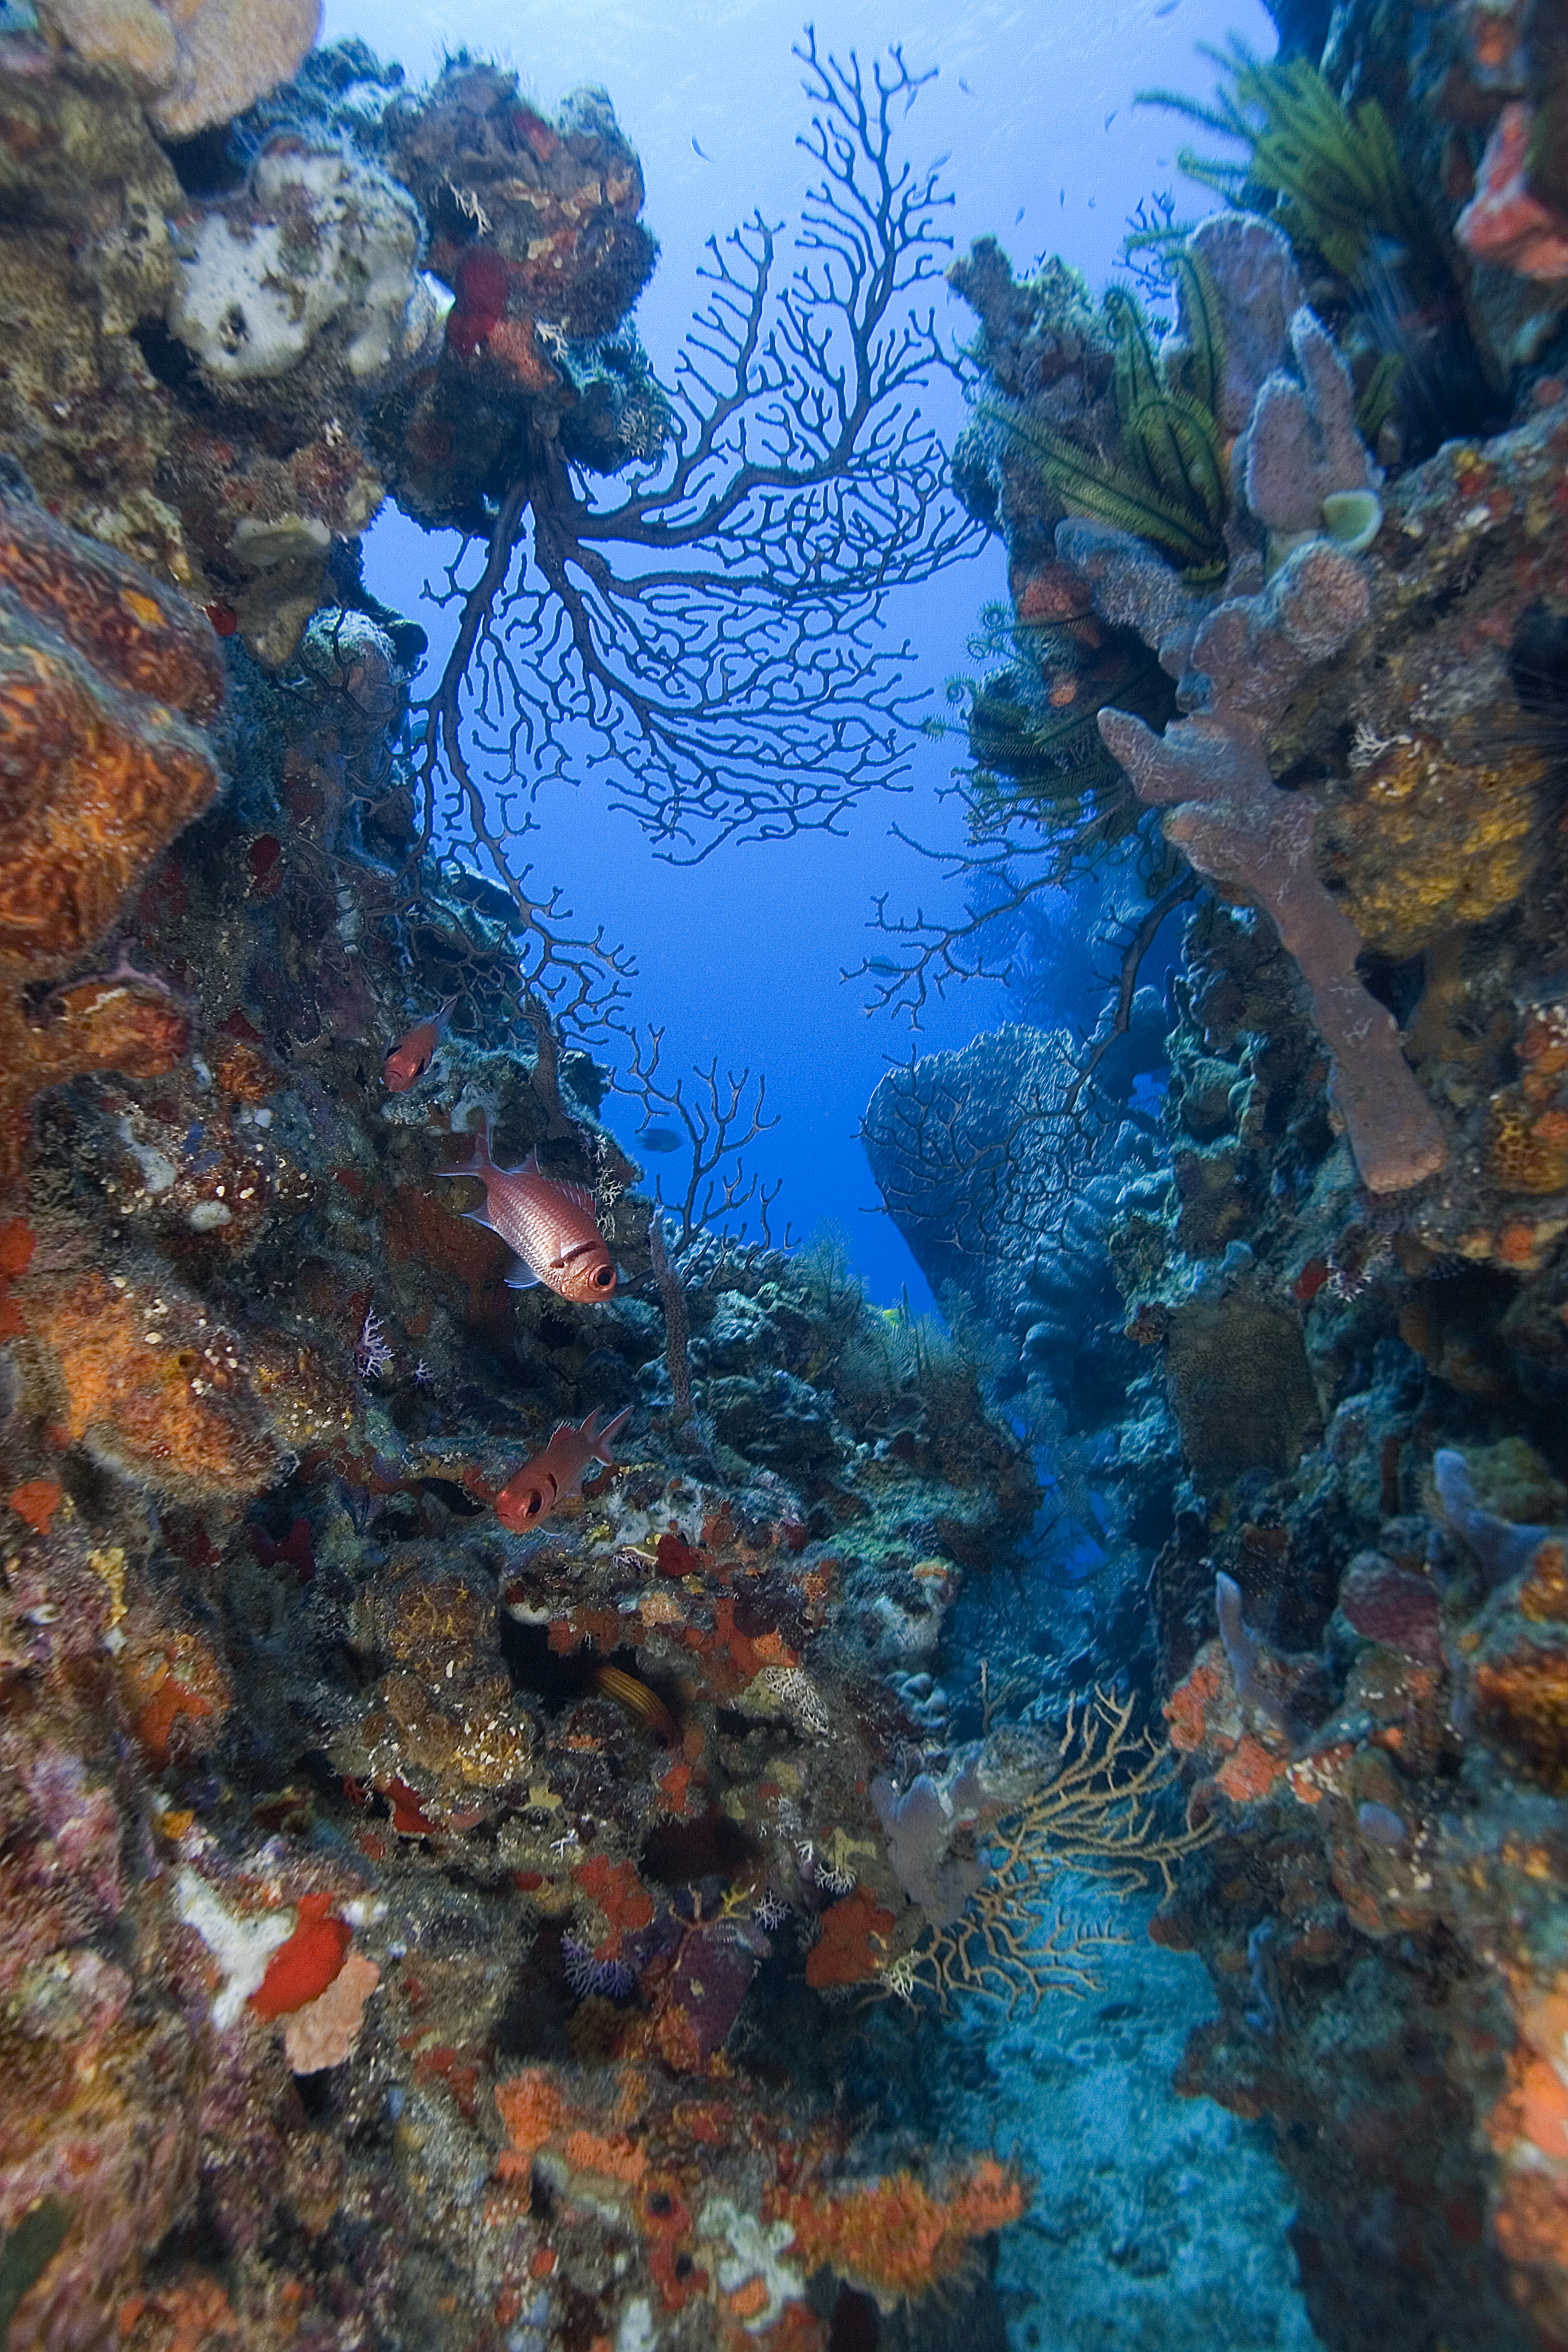 Vibrantly colored reef wall encrusted in corals of all shapes, sizes, and colors provides divers with a window into the great abyss